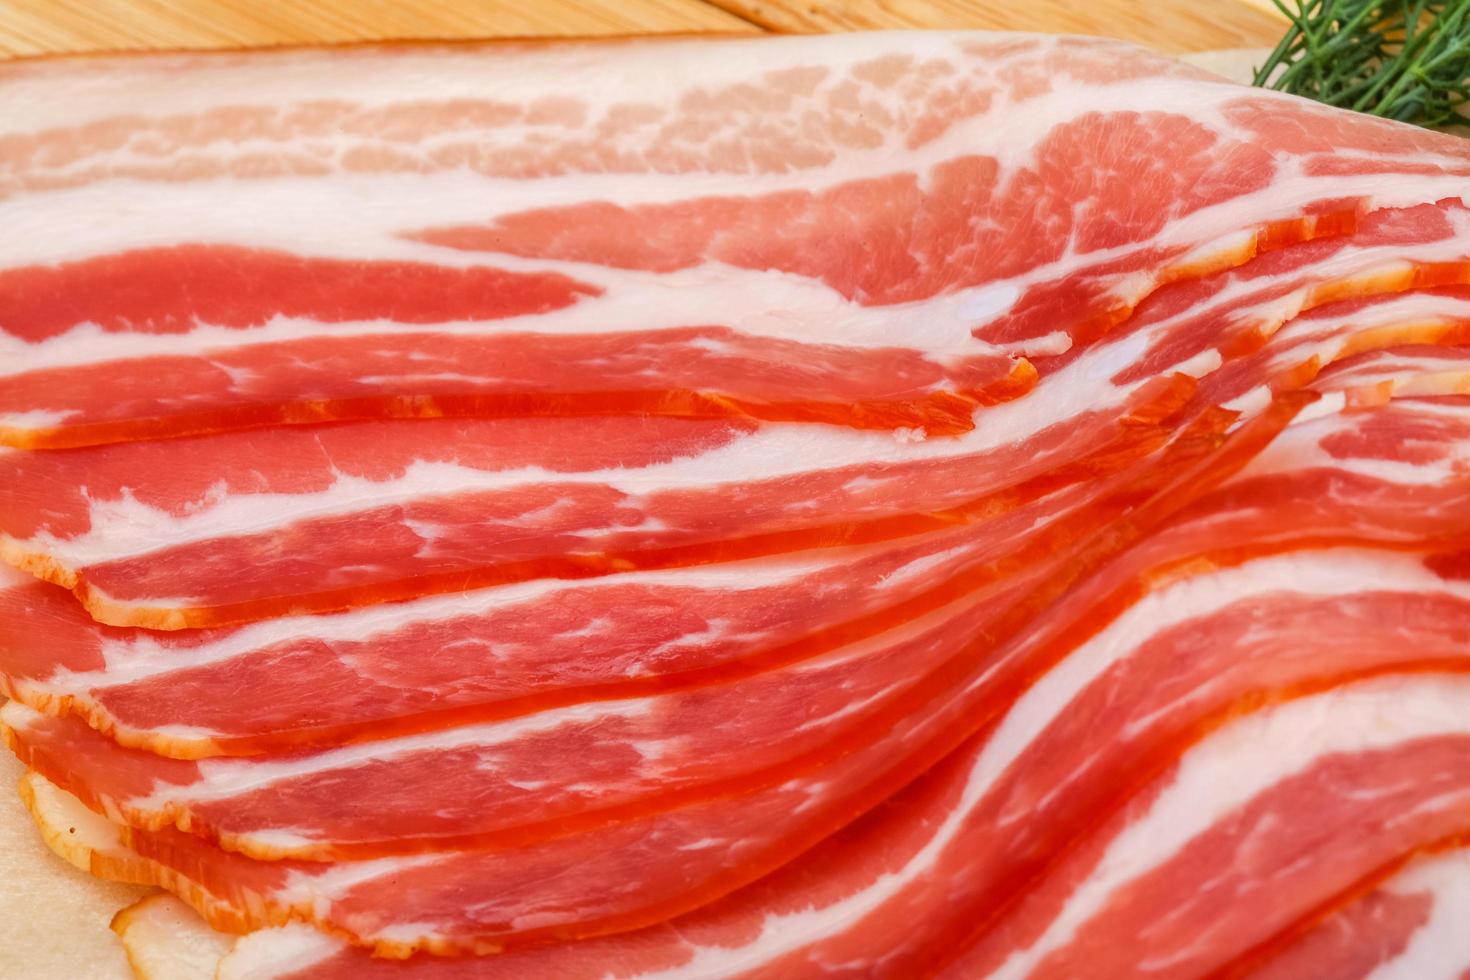 Sliced bacon on wooden board close up view photo